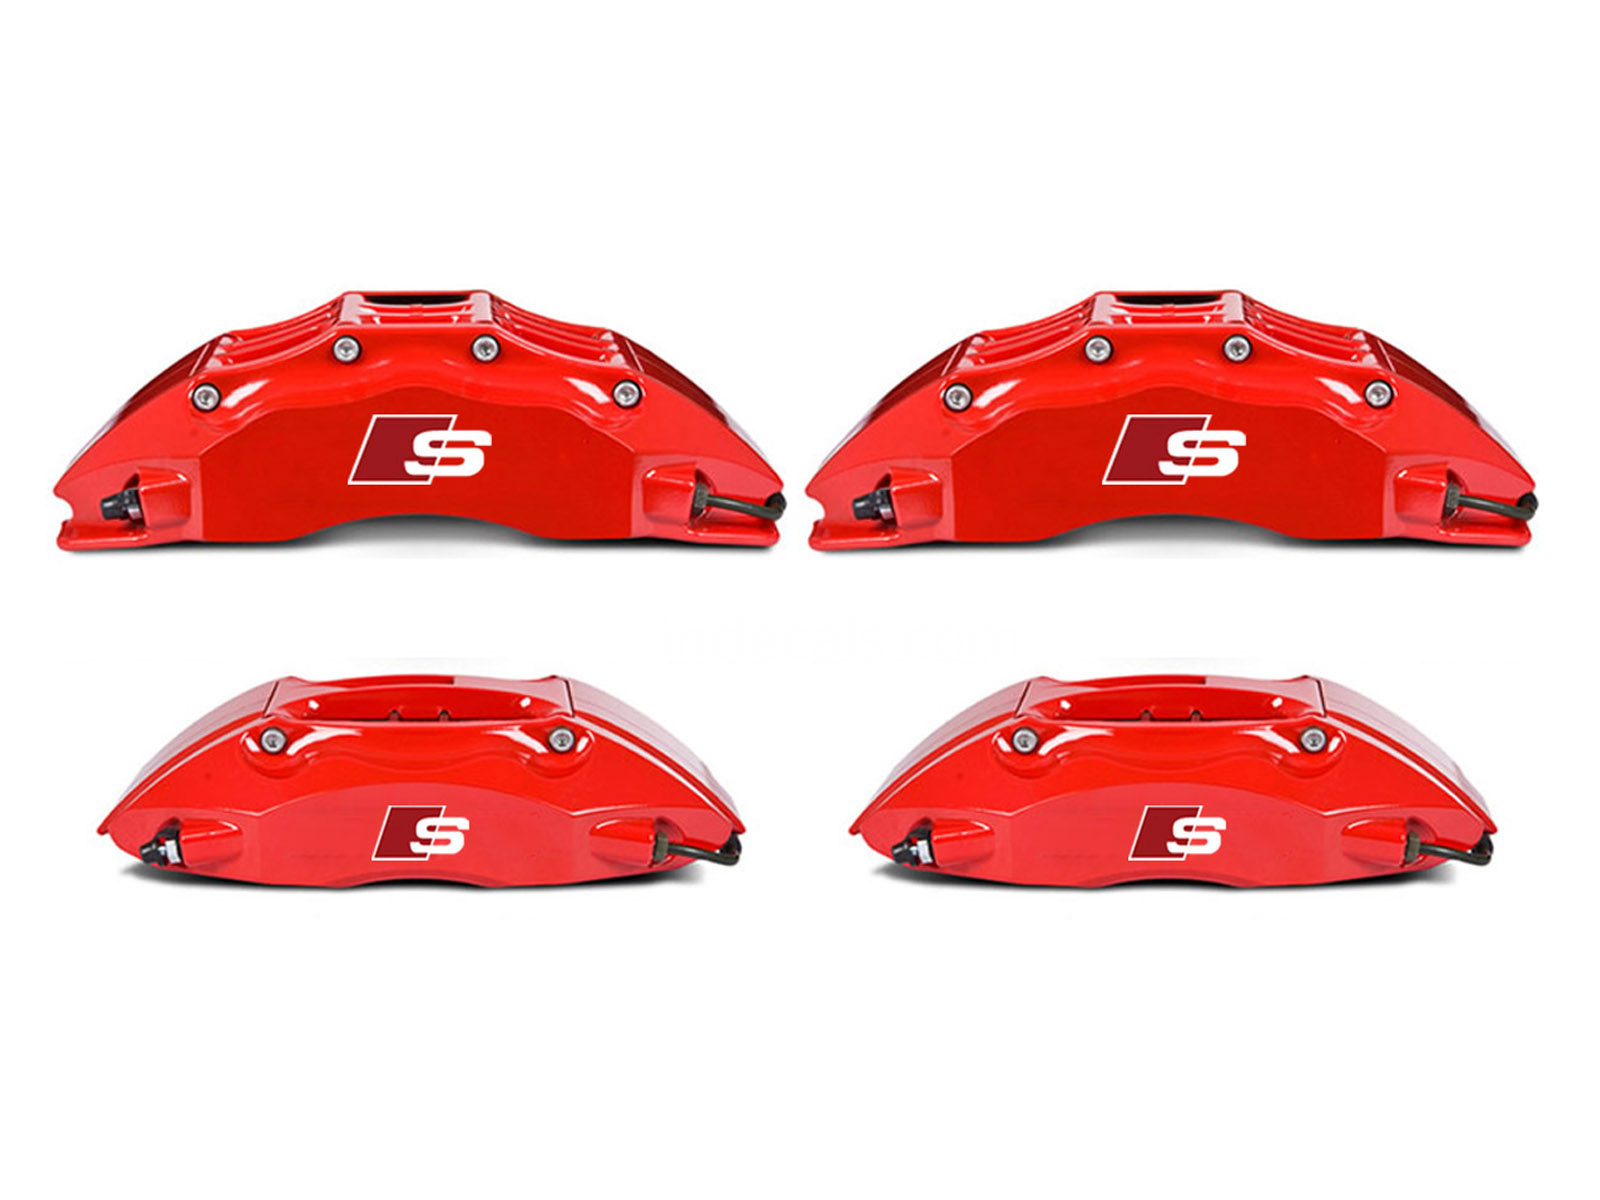 4 x Audi S-Line Stickers for Brake Calipers - White + Red